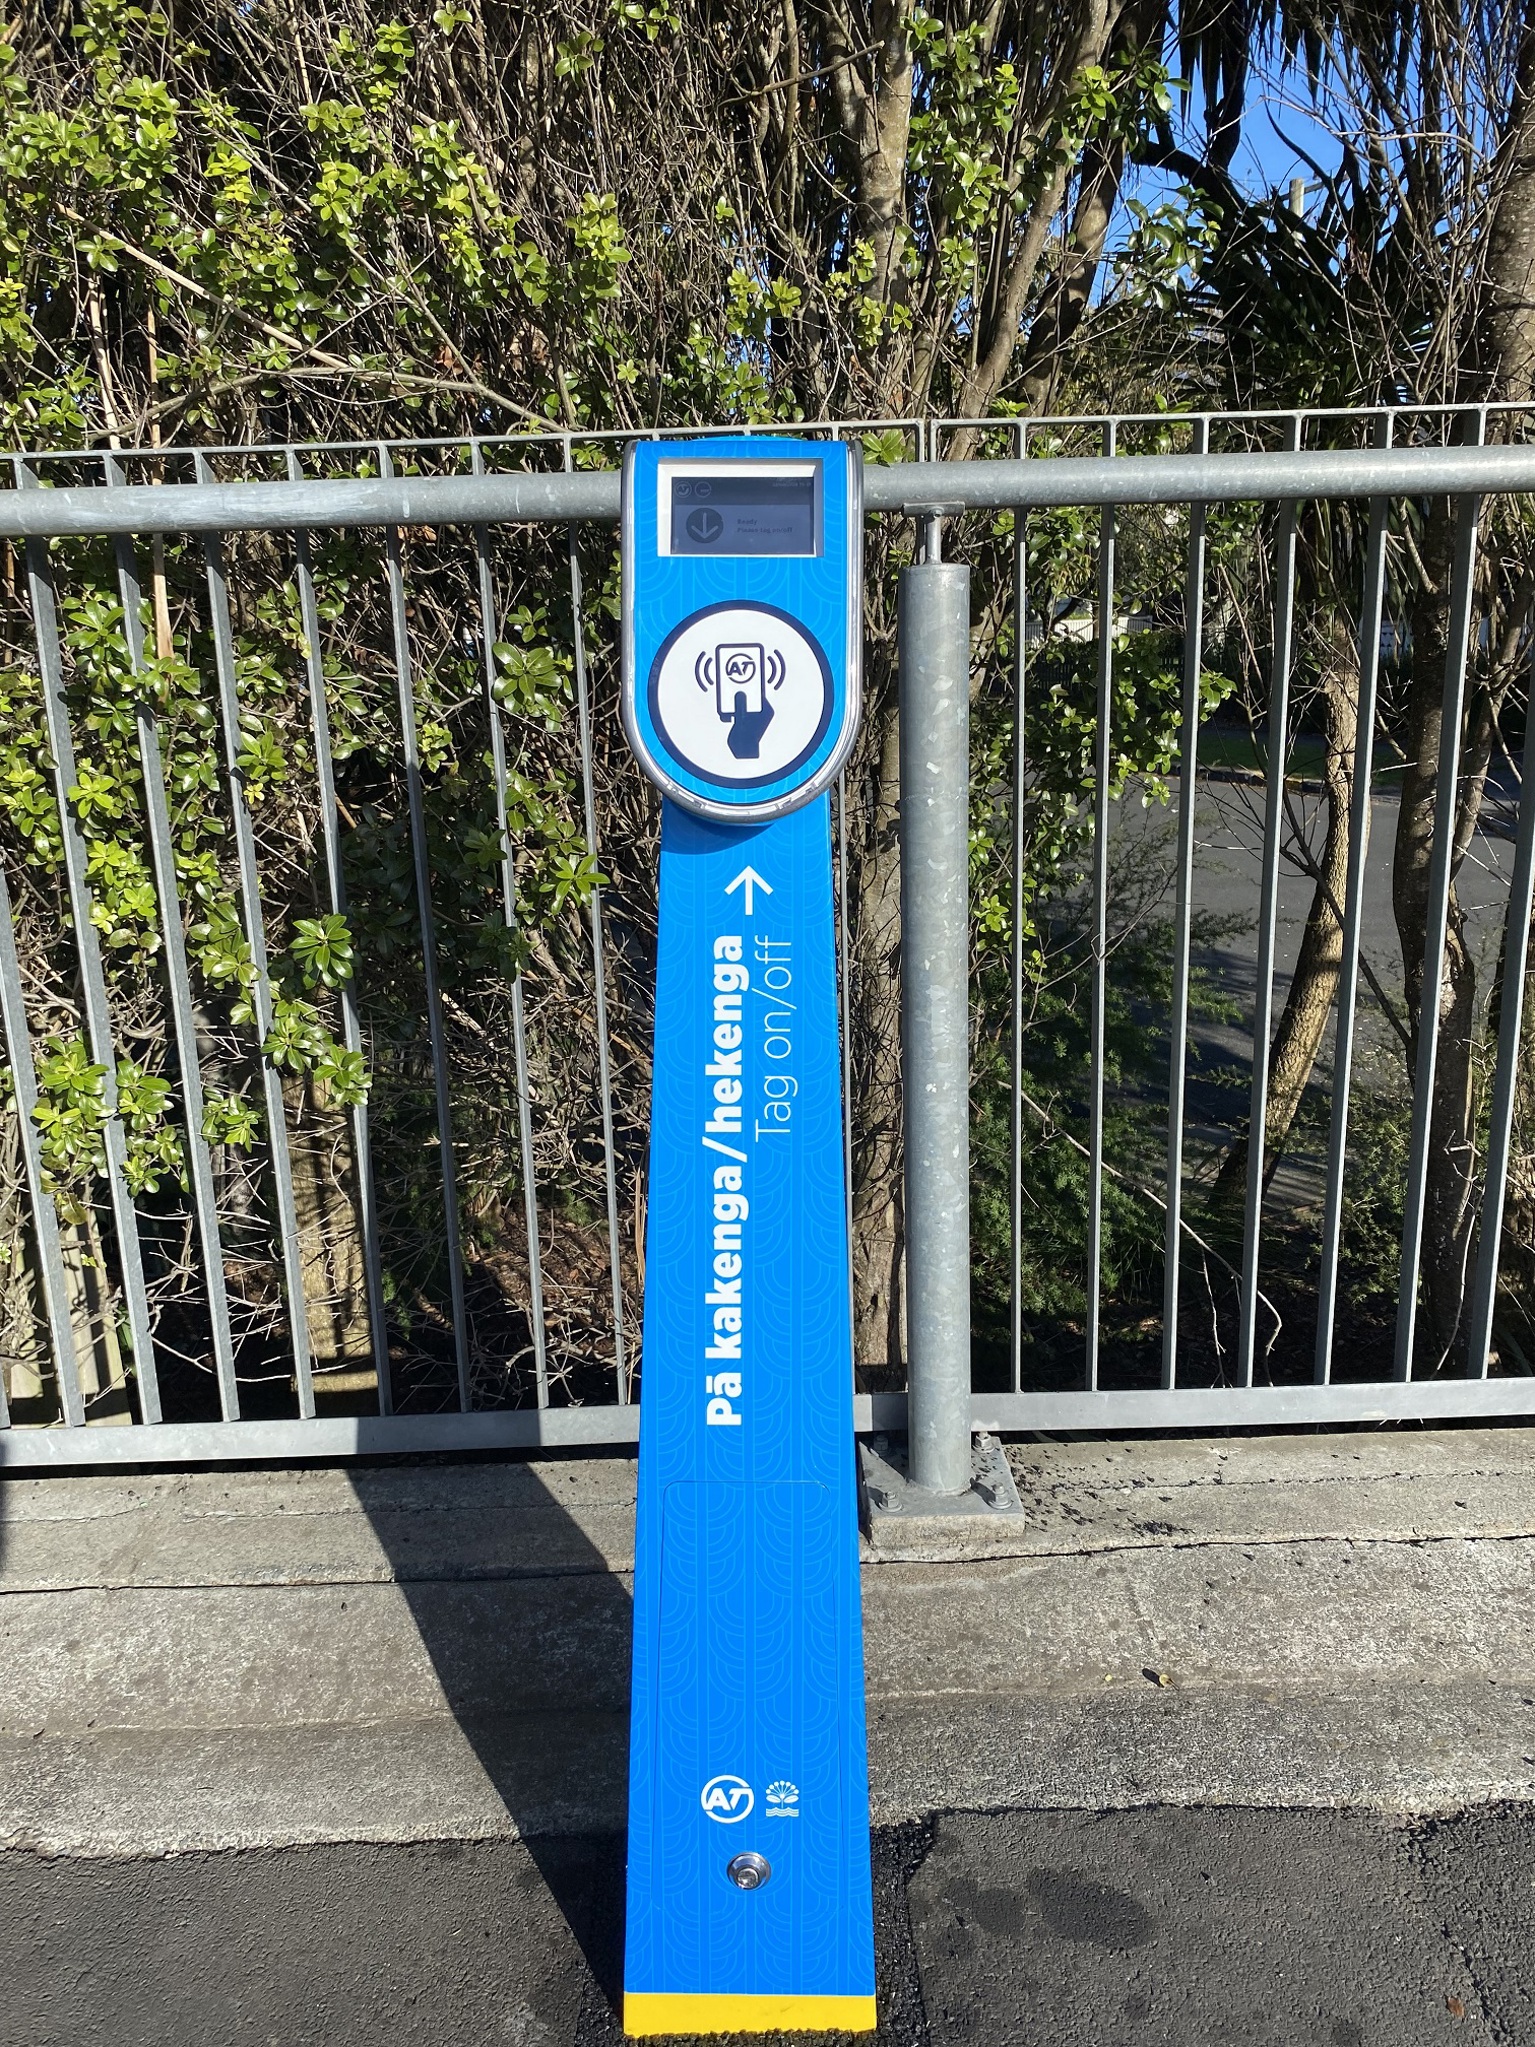 Photo of pillar-style card reader outside a train station